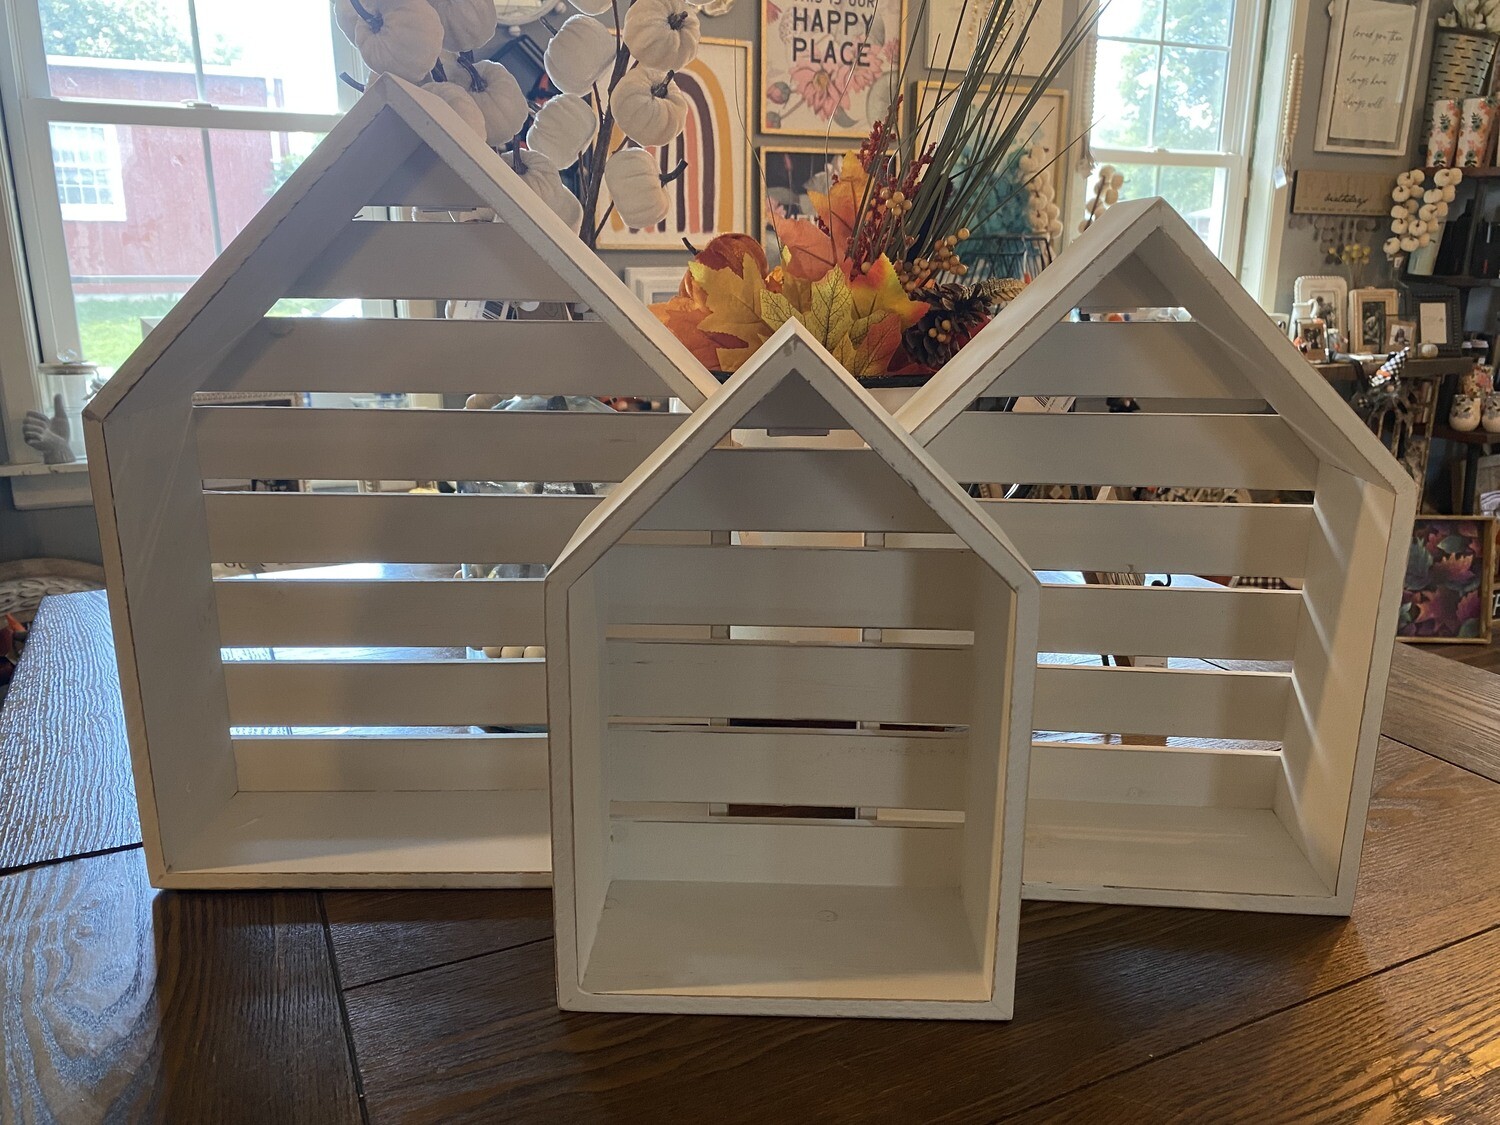 House Shaped Shadow Boxes